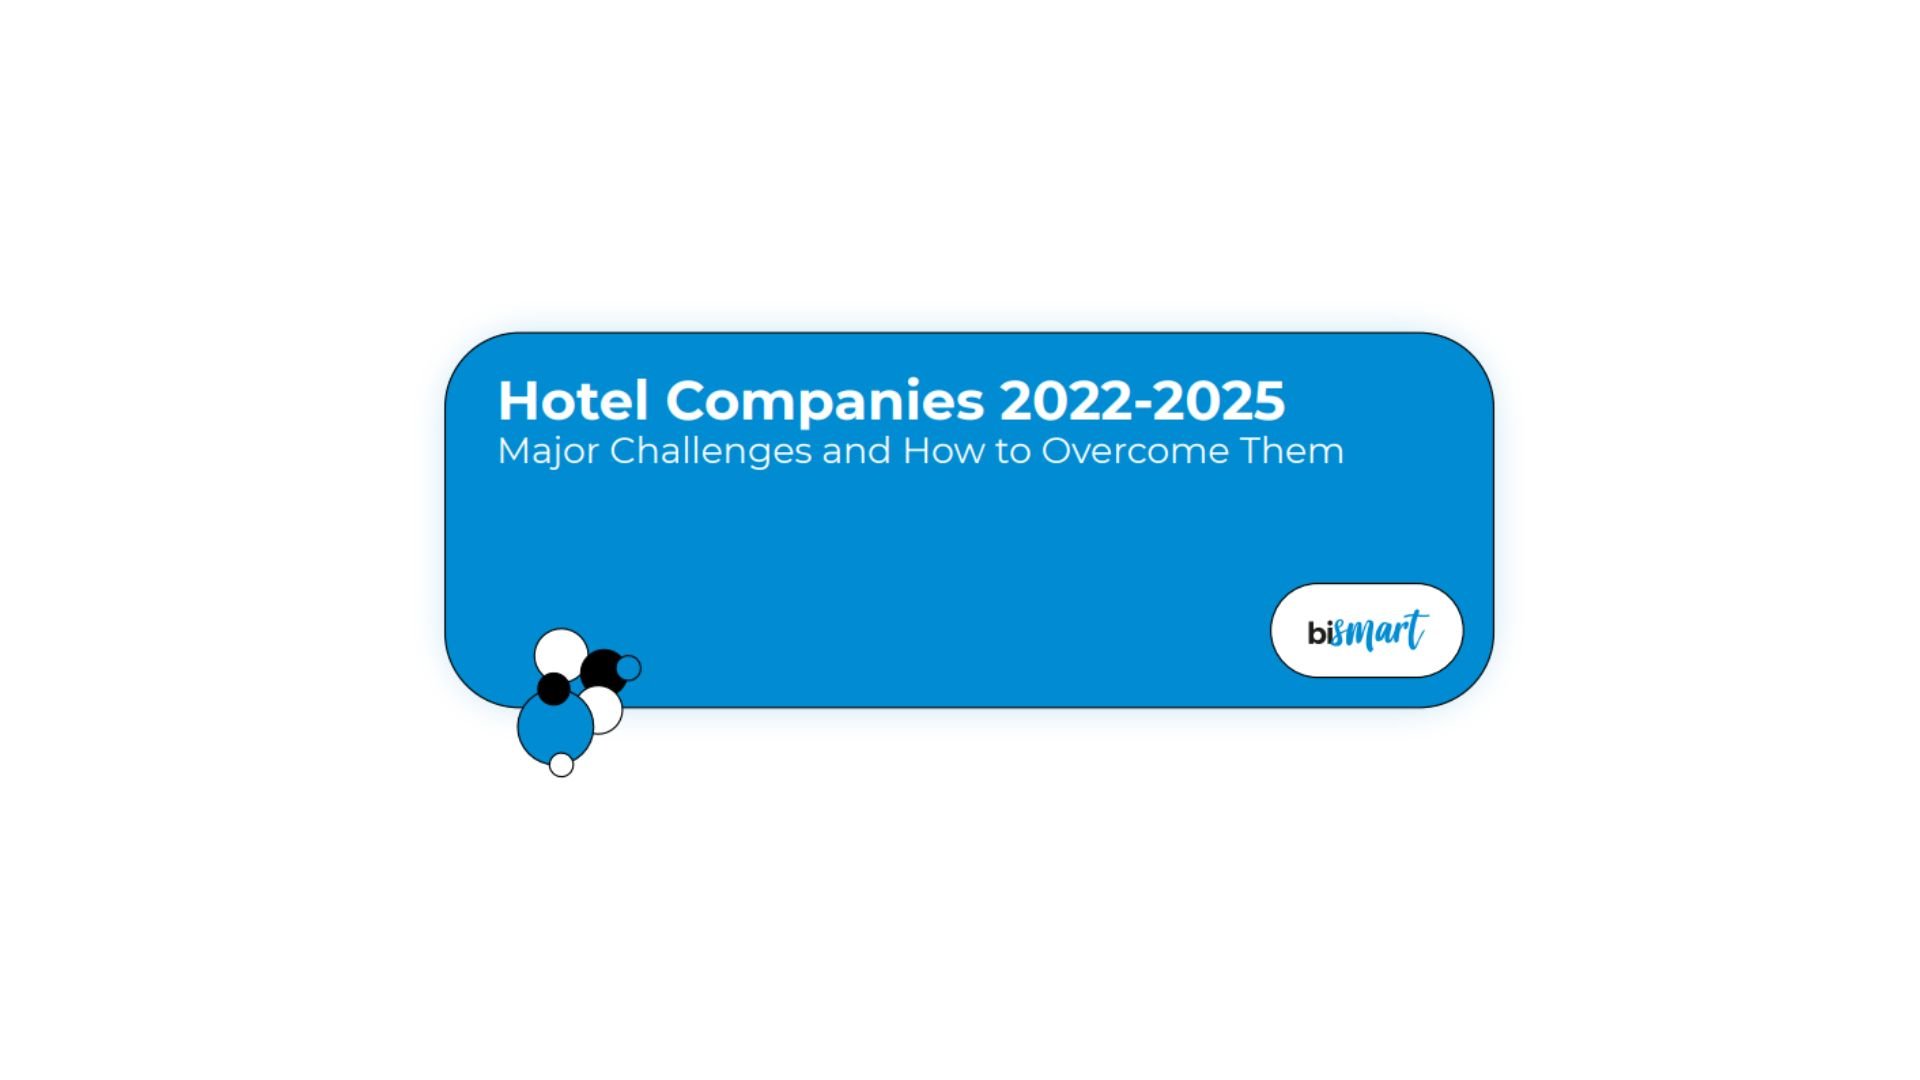 Hotel Companies 2022 - 2025 Major Challenges and how to overcome them